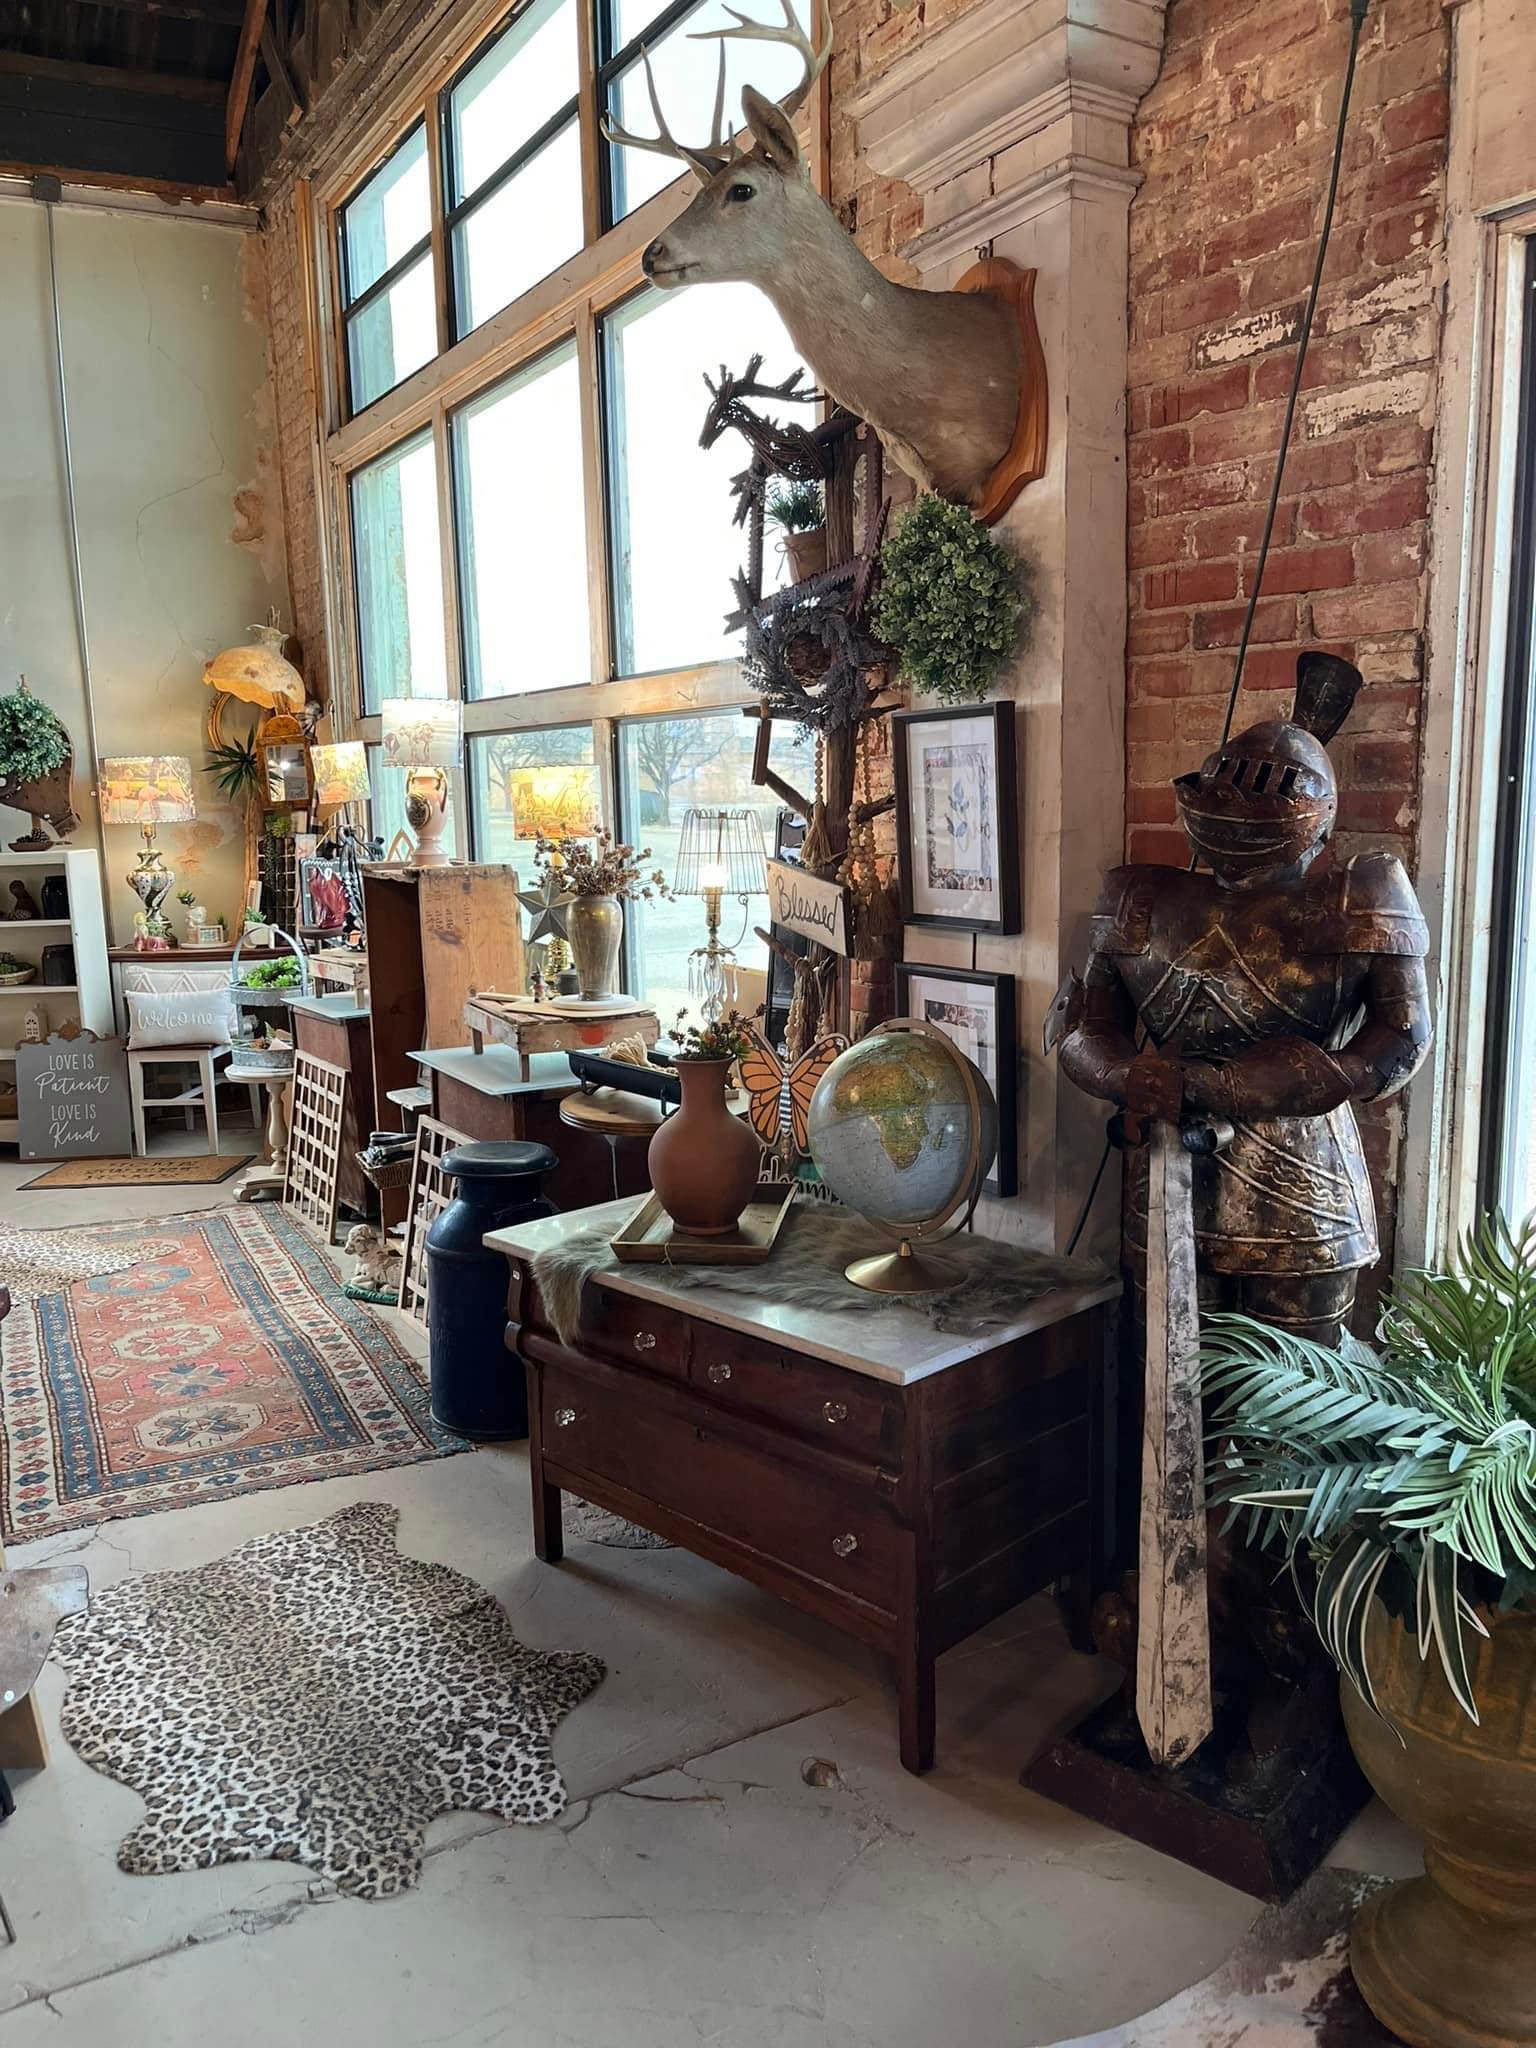 Visit us at our Store in Crosbyton, TX | Stuffology - Where Vintage Meets Modern